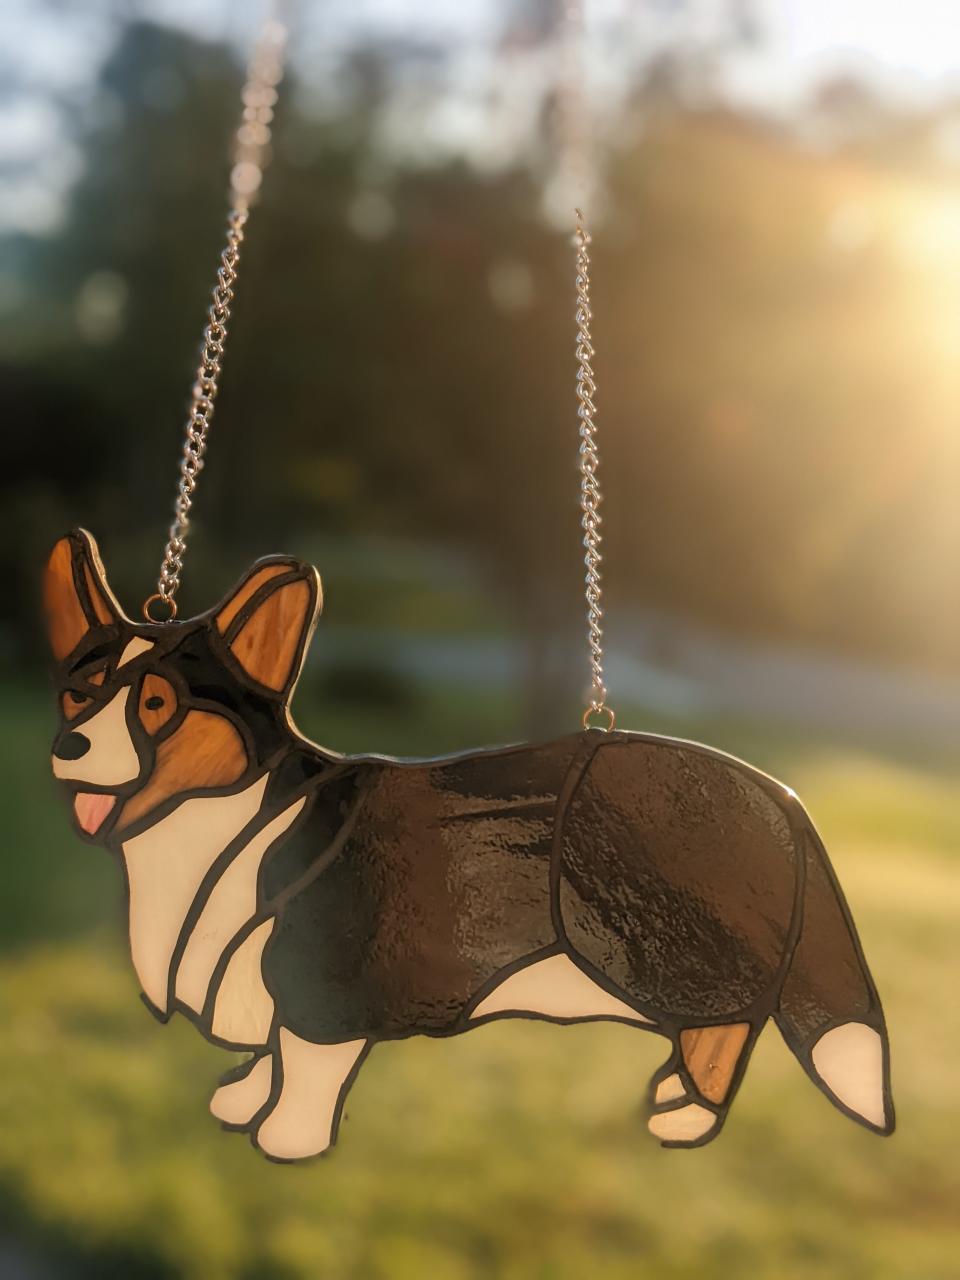 Animal portraits in glass are among the items by Jenny Blaze, one of the featured artists in this year’s Artisans in the Garden event at Tallahassee Nurseries on Nov. 4, 2023, featuring 50 local artists, musicians, and foodies.